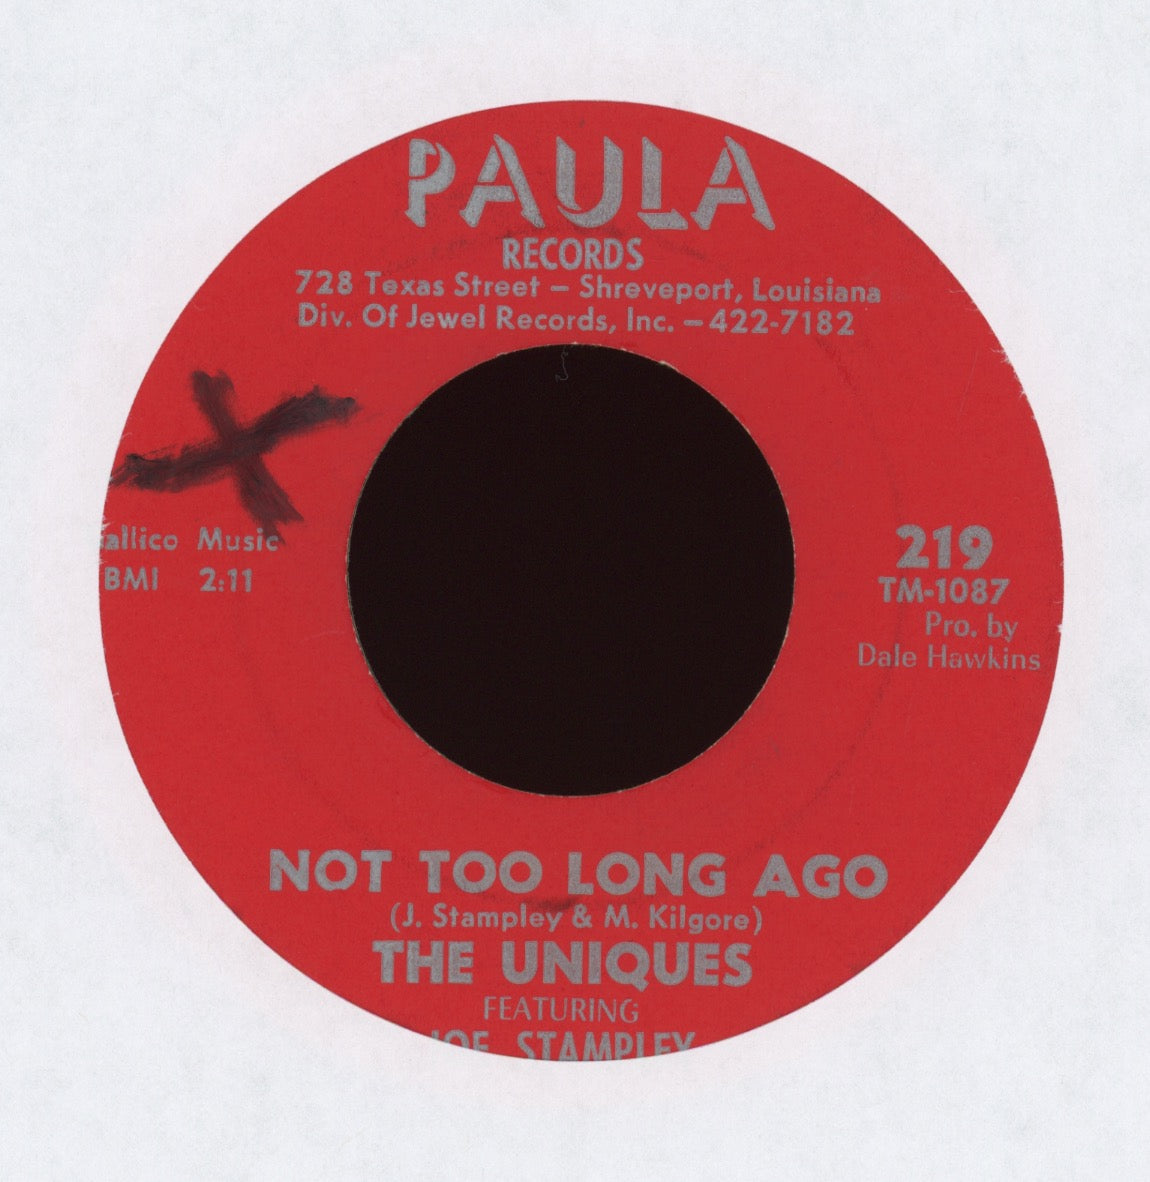 The Uniques Featuring Joe Stampley - Not Too Long Ago on Paula Northern Soul 45